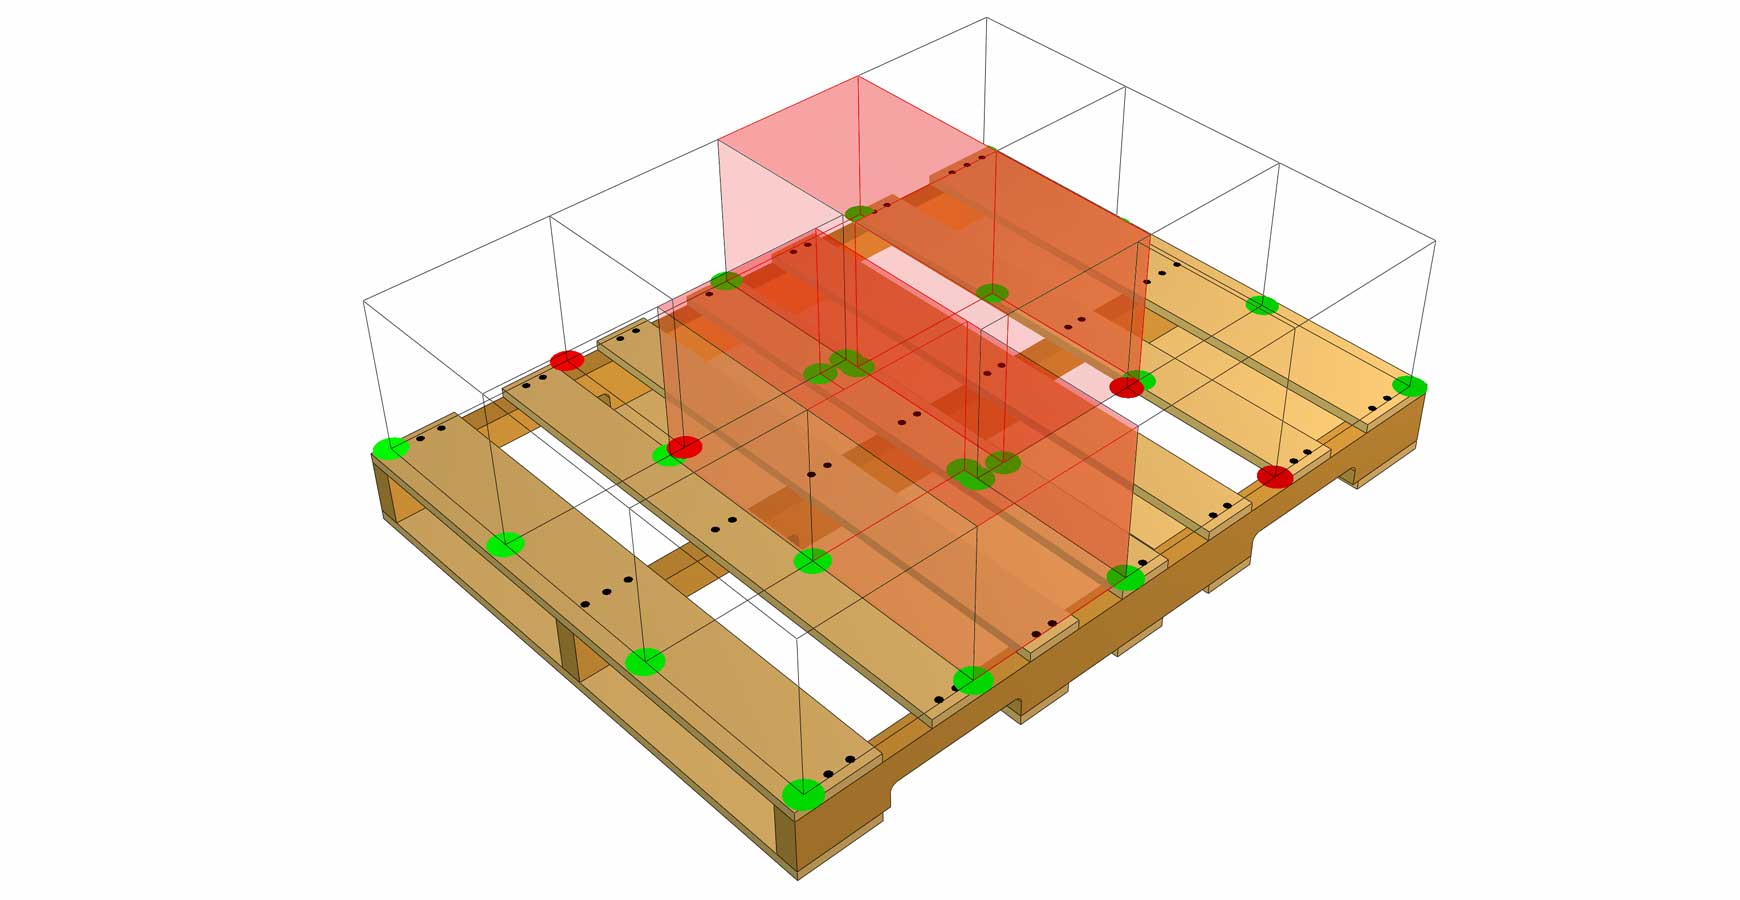 A pallet with overlaid green and red circles along with transparent red and clear boxes on top.